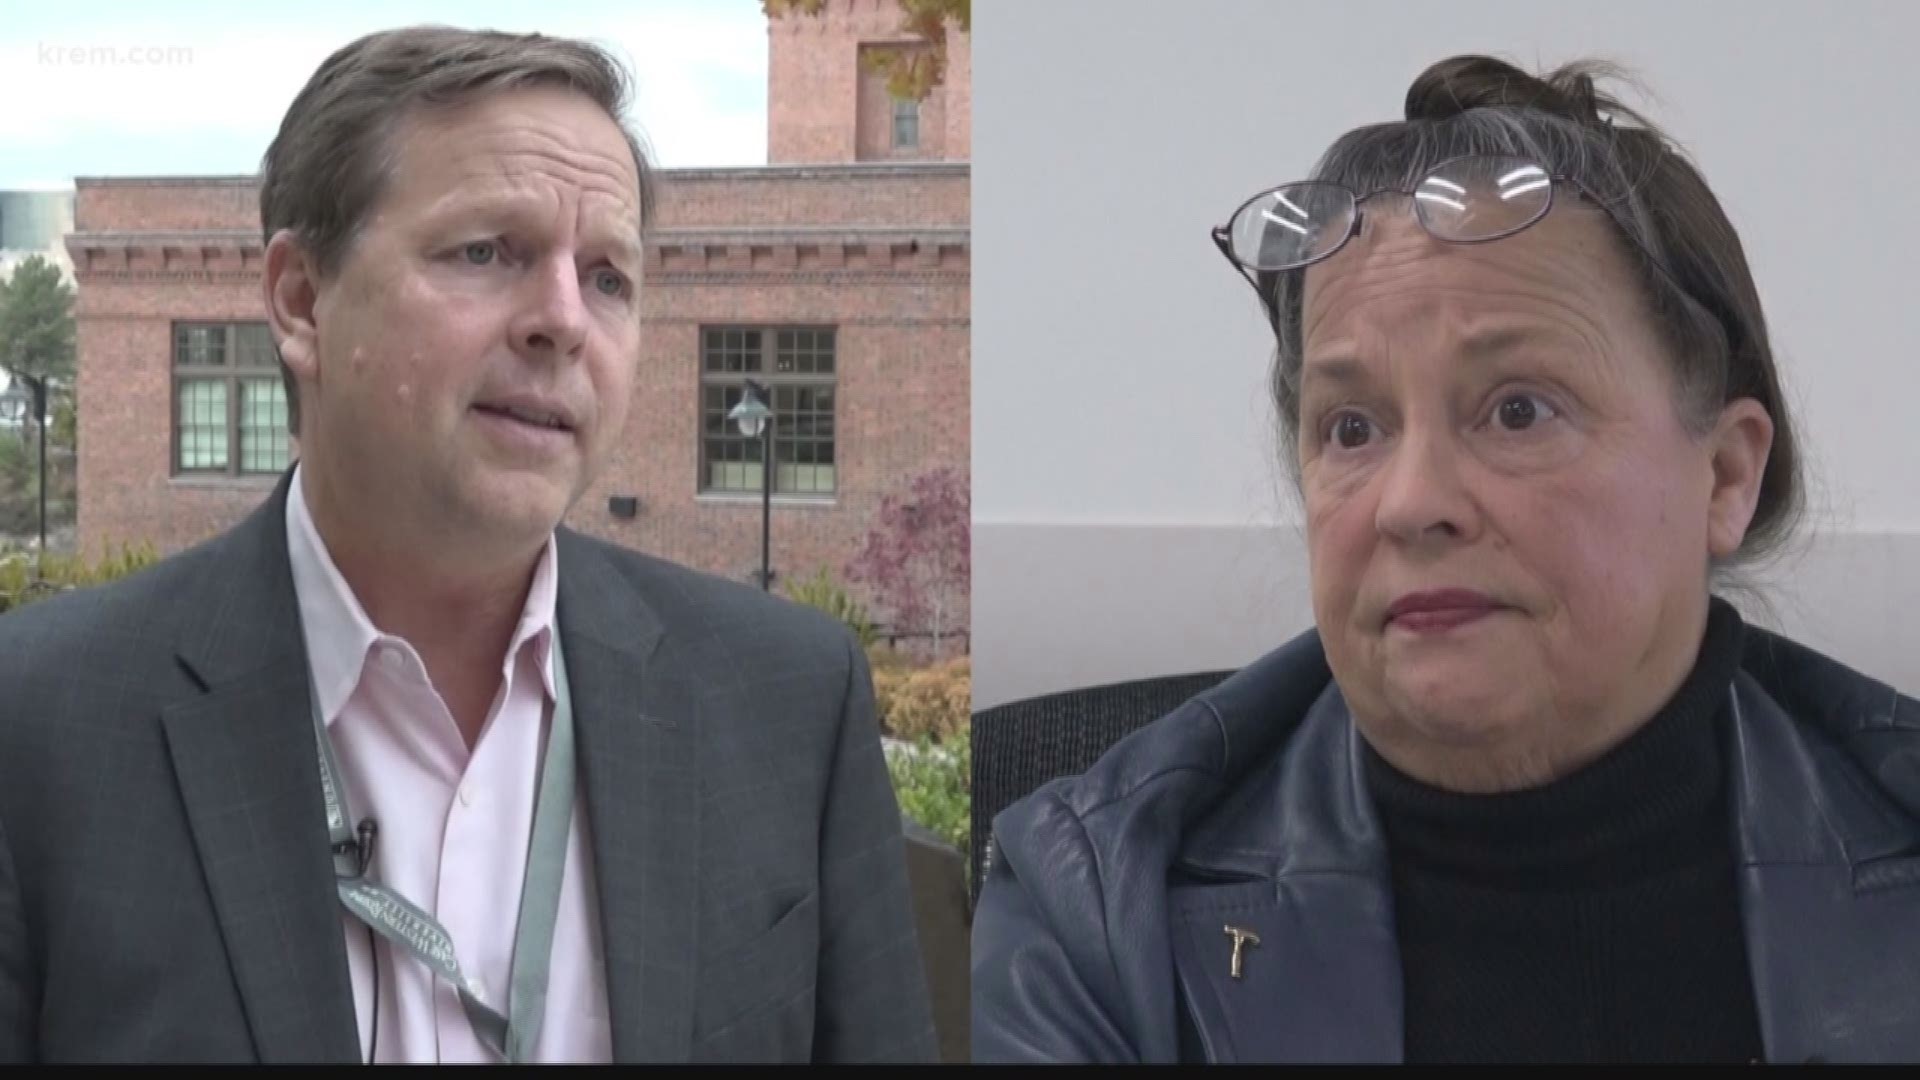 The Spokane City Council President and a local activist shared their experience of being targeted by state Representative Matt Shea.